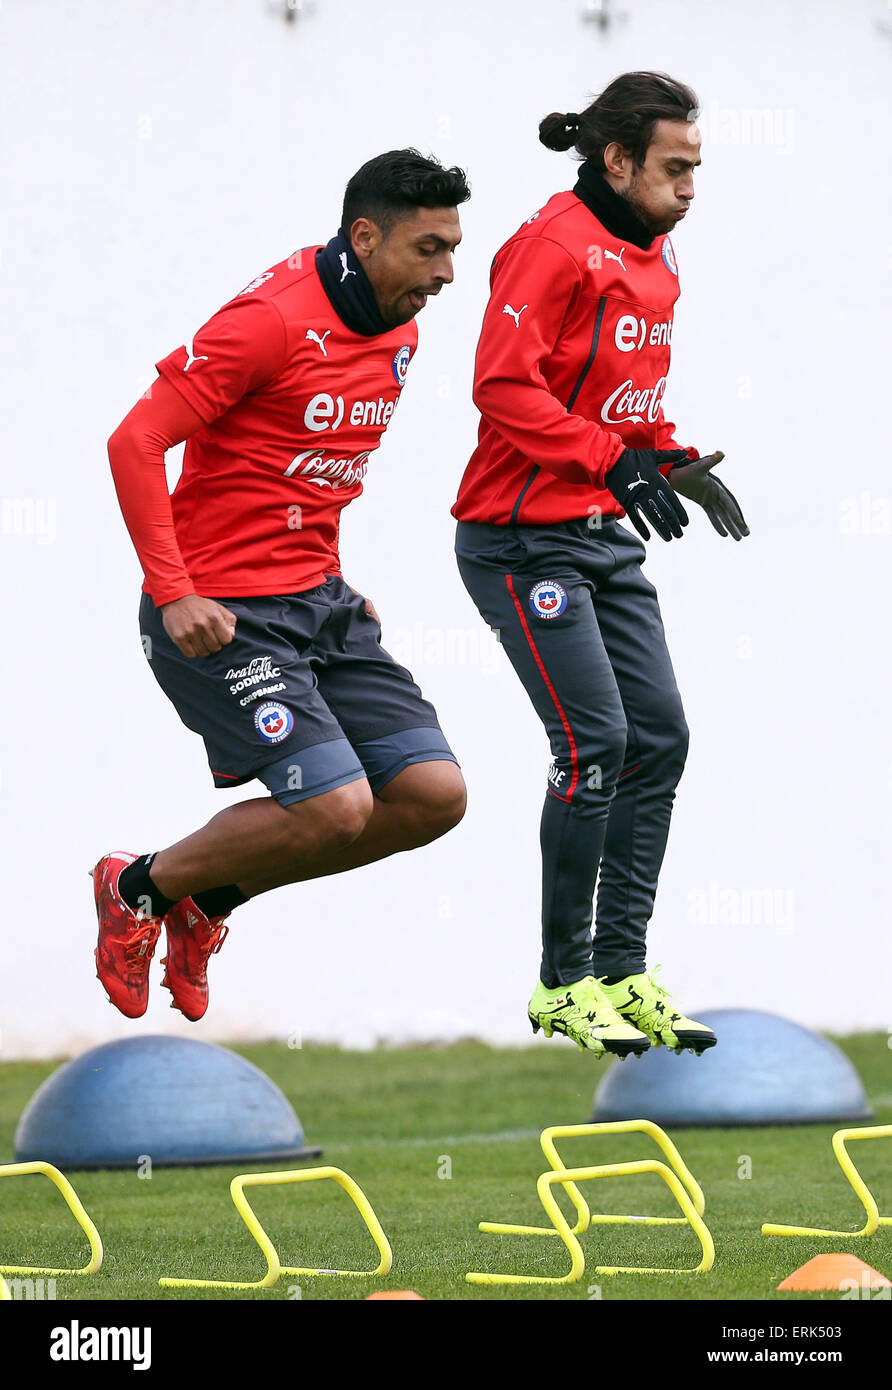 Santiago, Chile. 3rd June, 2015. Gonzalo Jara (L) and Jorge Valdivia of Chile attend a training session in Santiago, capital of Chile, on June 3, 2015. Chile's national soccer team is preparing for the upcoming 2015 Copa America, which will be held from June 11 to July 4 in Chile. © ANFP/Xinhua/Alamy Live News Stock Photo